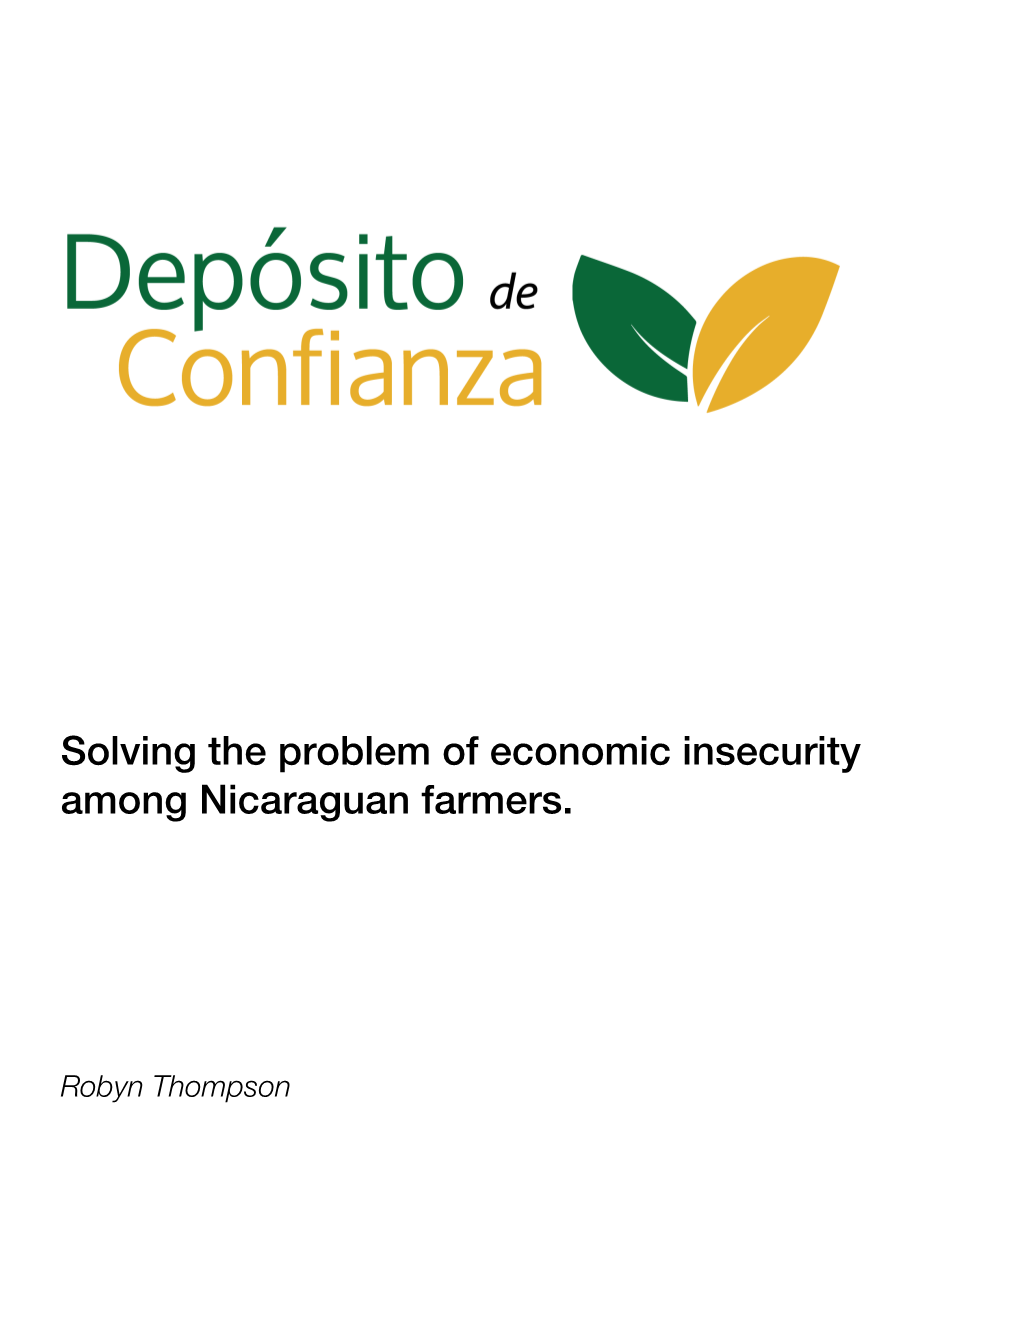 Solving the Problem of Economic Insecurity Among Nicaraguan Farmers